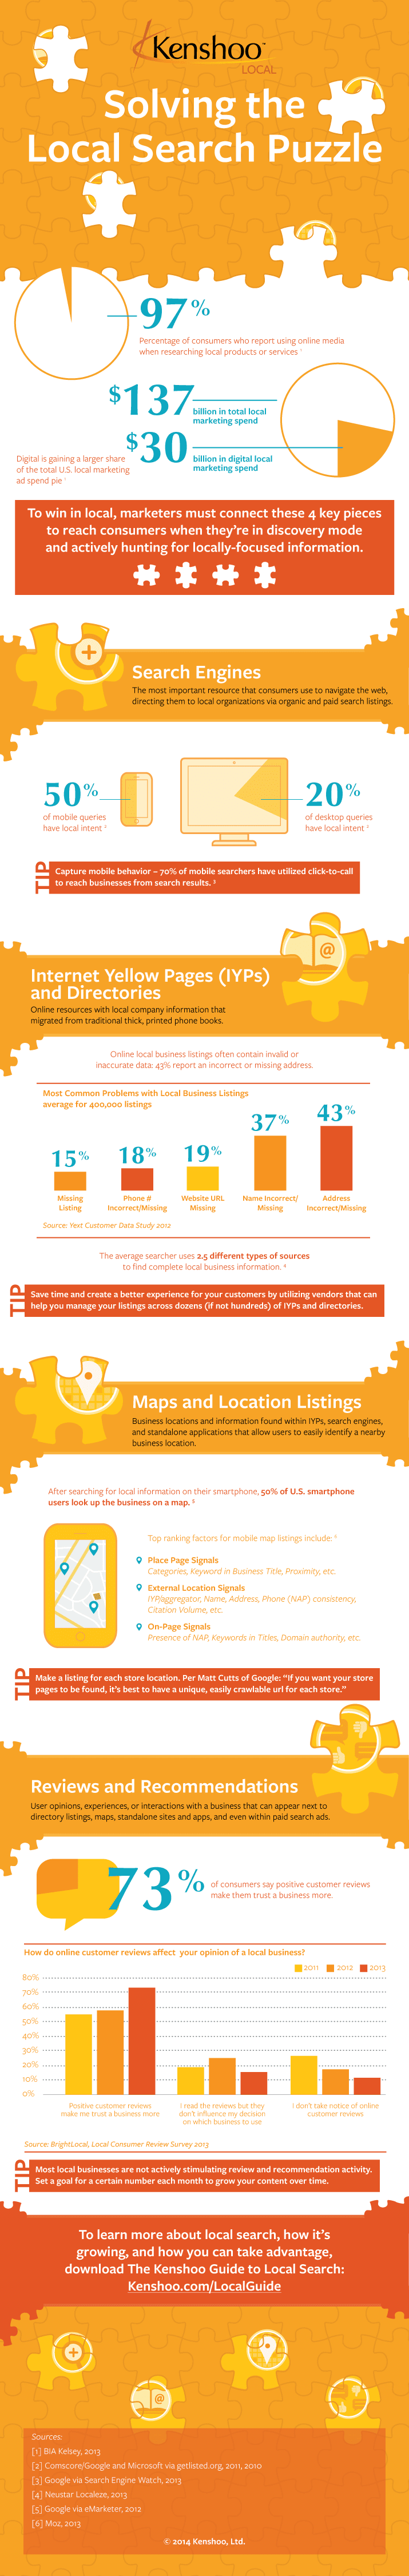 Solving-the-Local-Search-Puzzle-Infographic